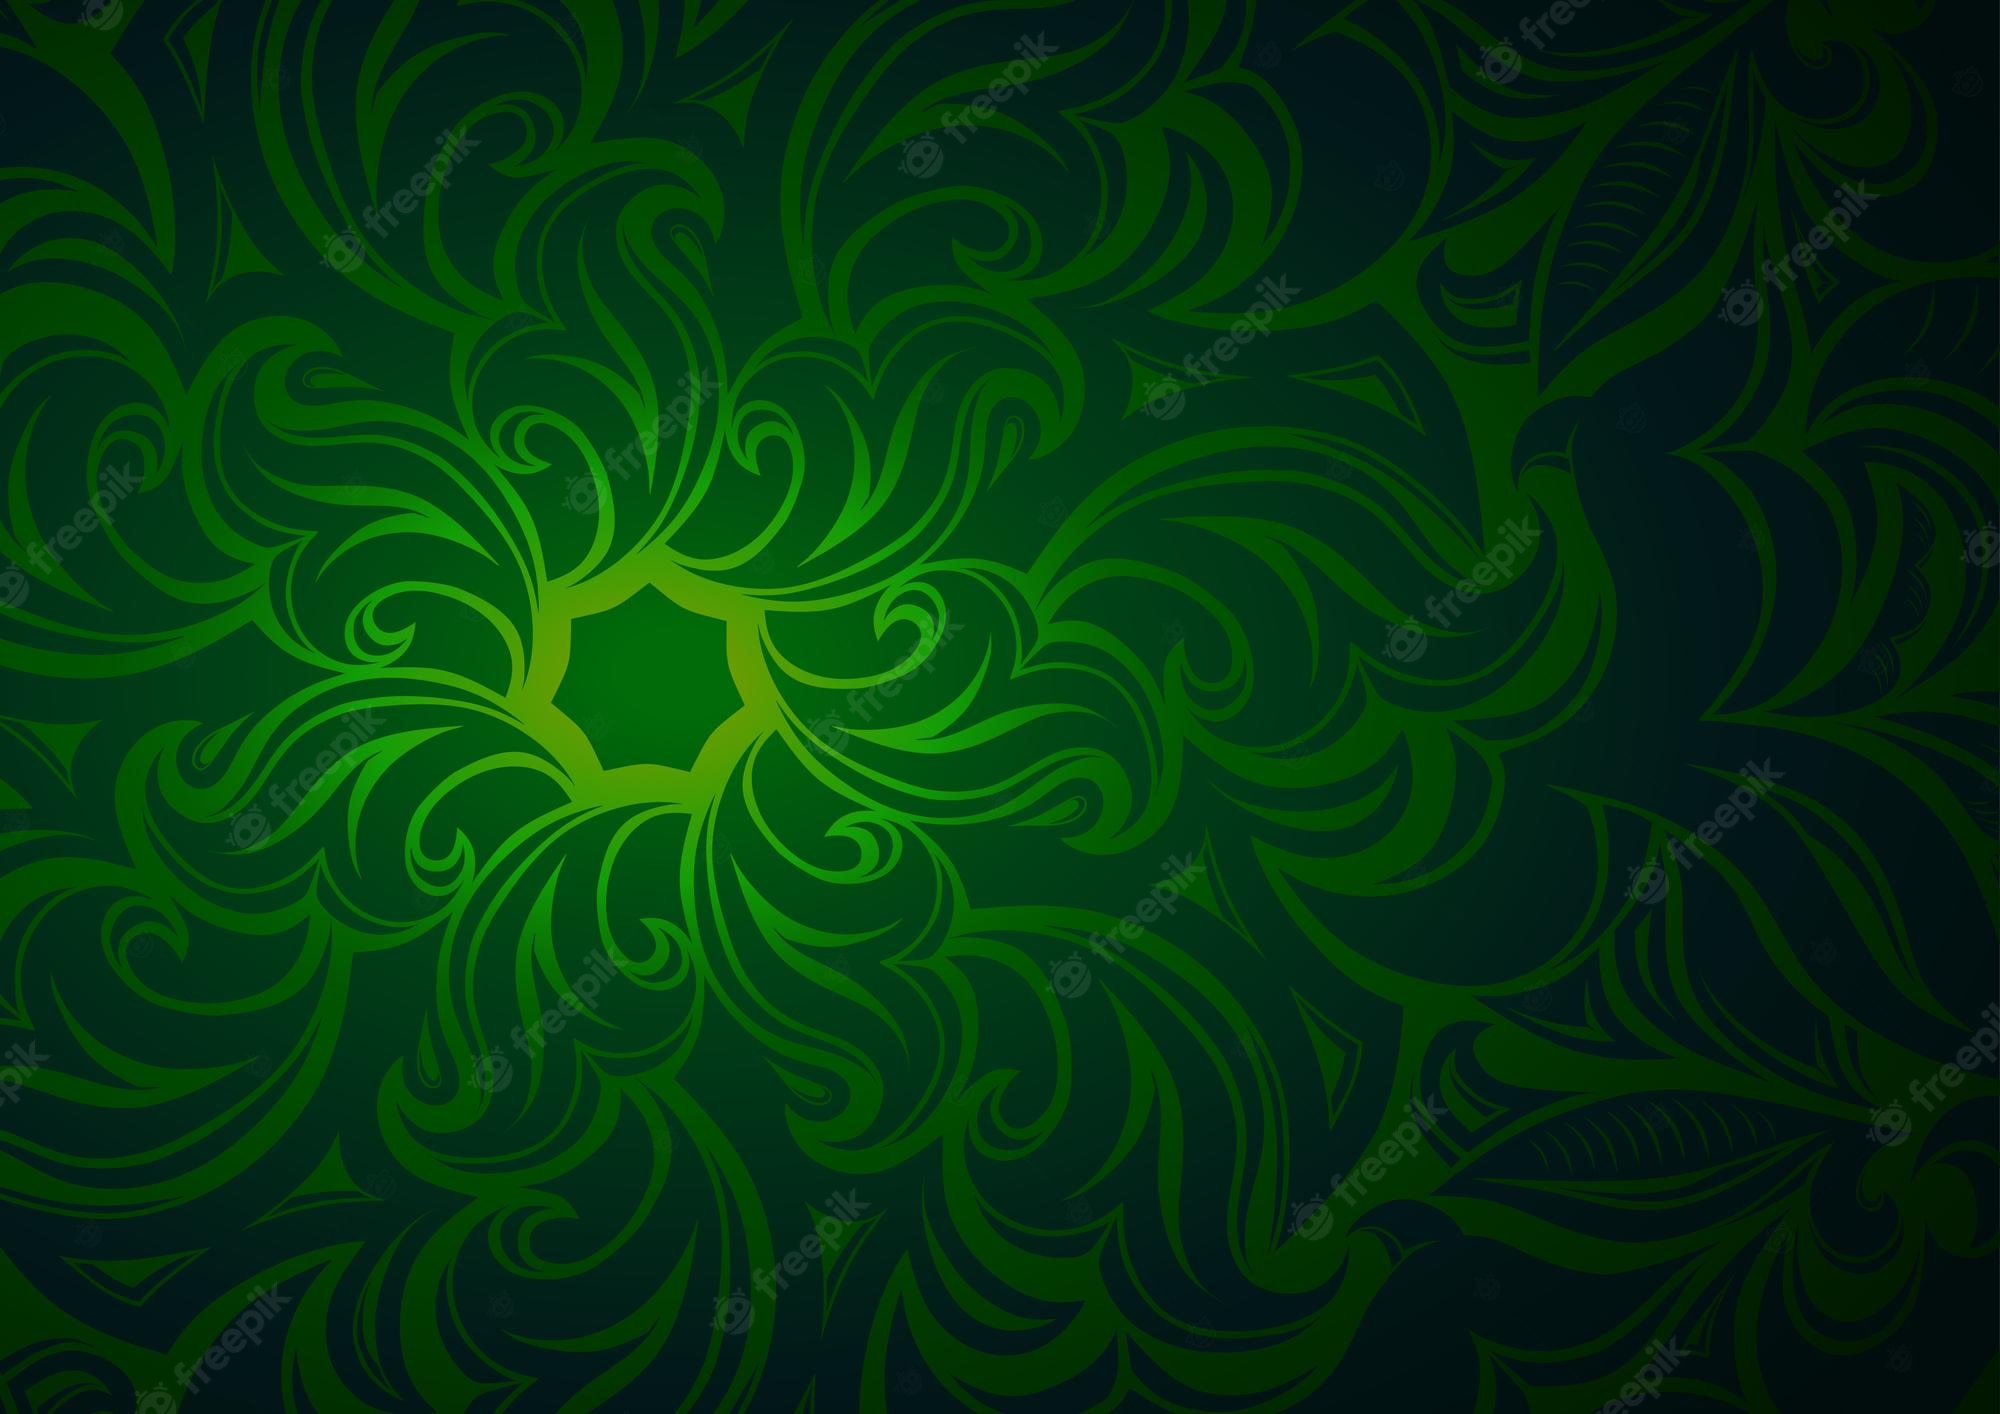 Premium Vector. Floral green gradient wallpaper with stylized flowers and foliage patterns dark background